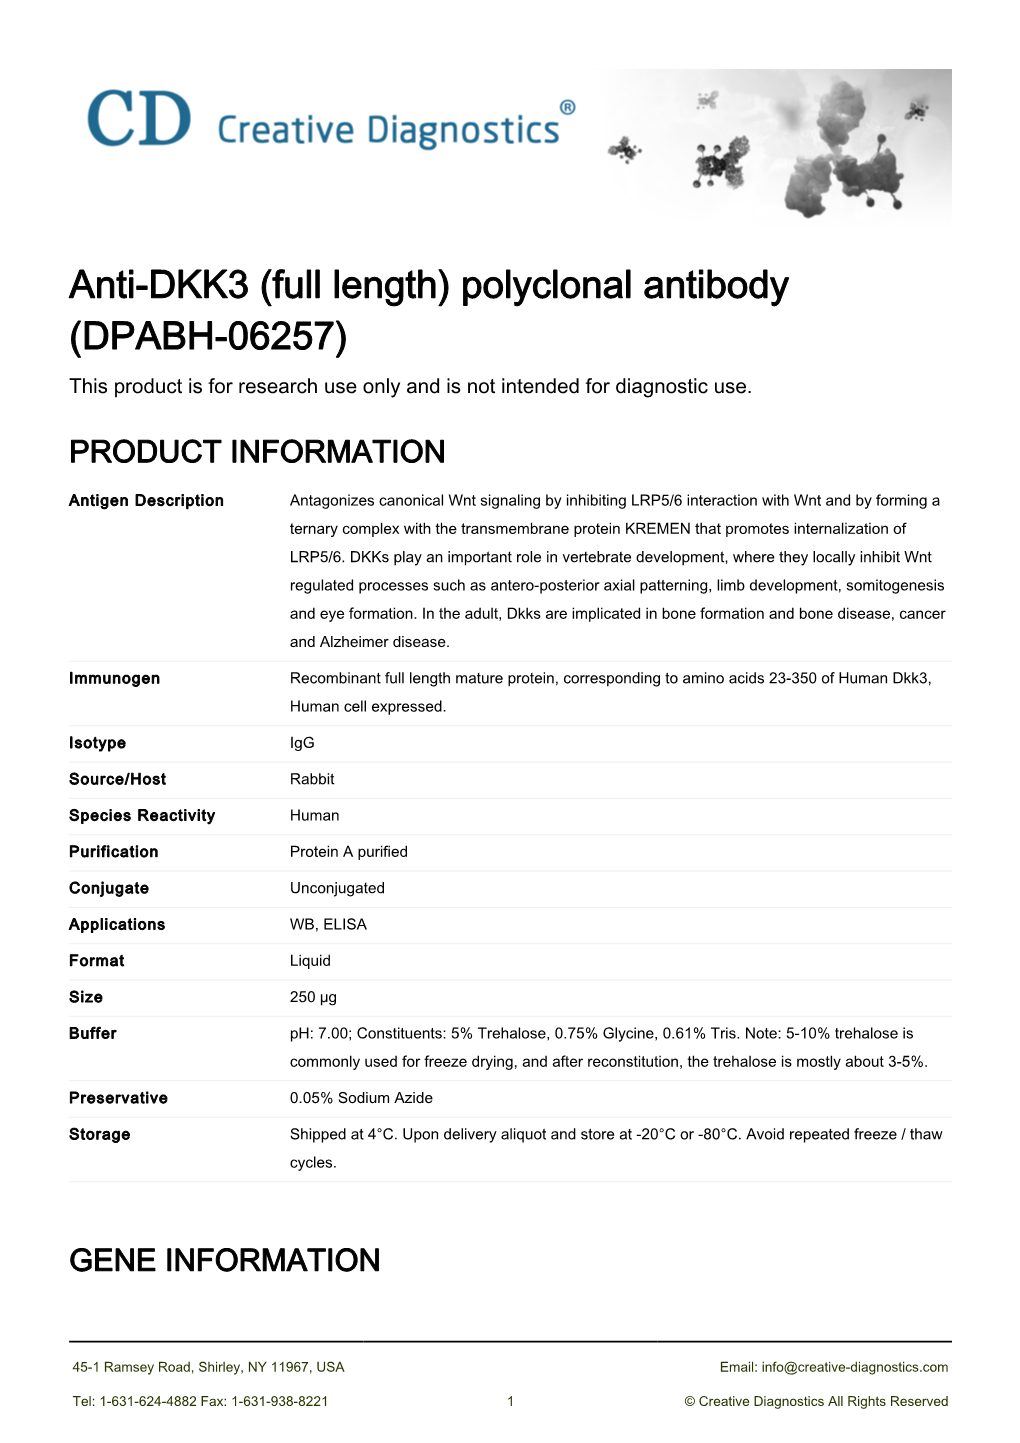 Anti-DKK3 (Full Length) Polyclonal Antibody (DPABH-06257) This Product Is for Research Use Only and Is Not Intended for Diagnostic Use